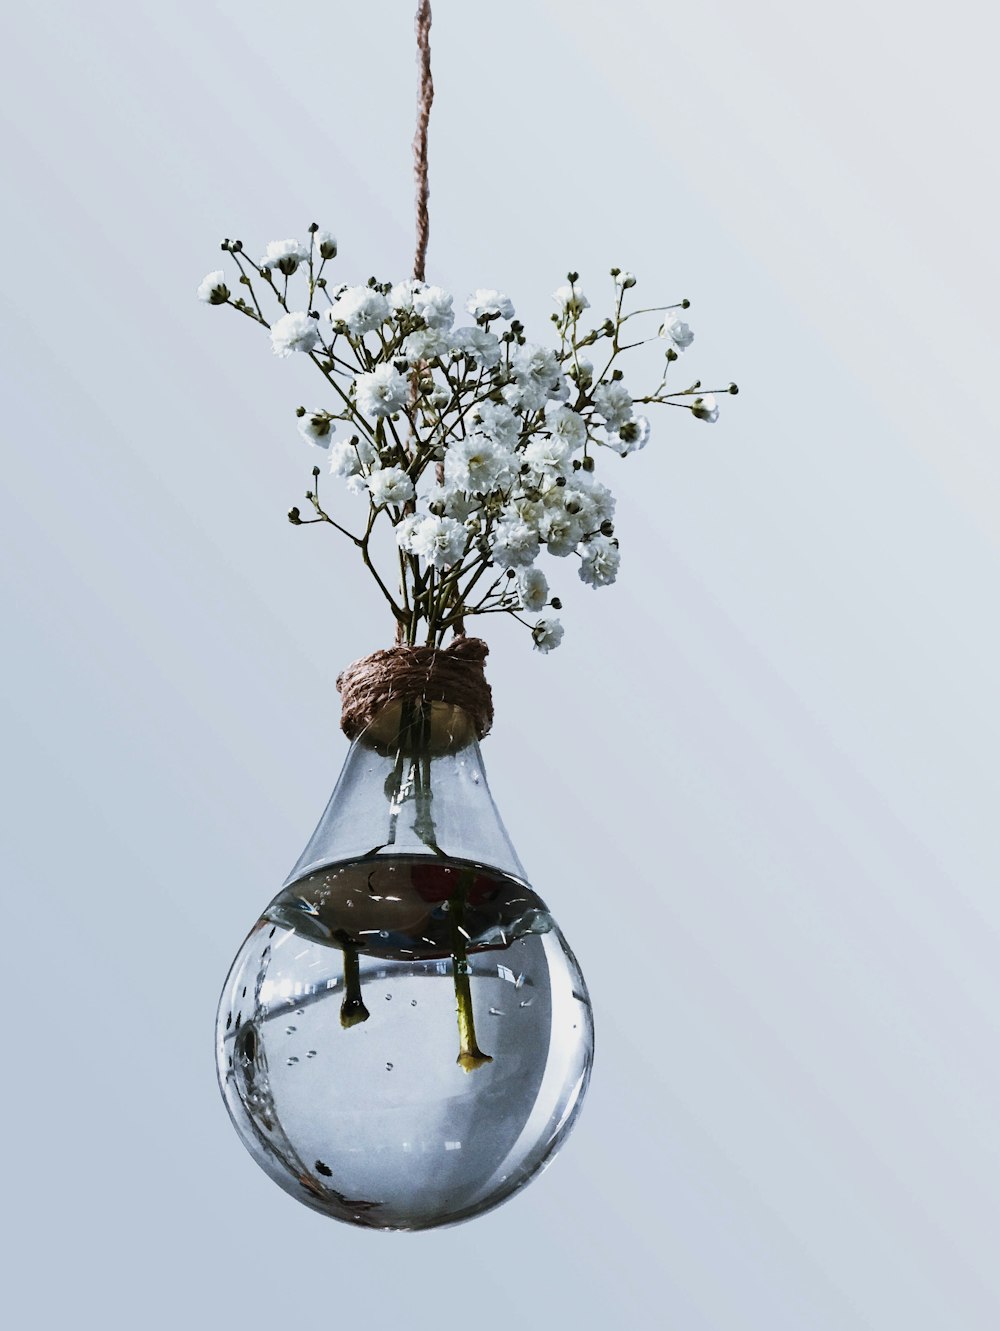 a glass vase with flowers in it hanging from a rope